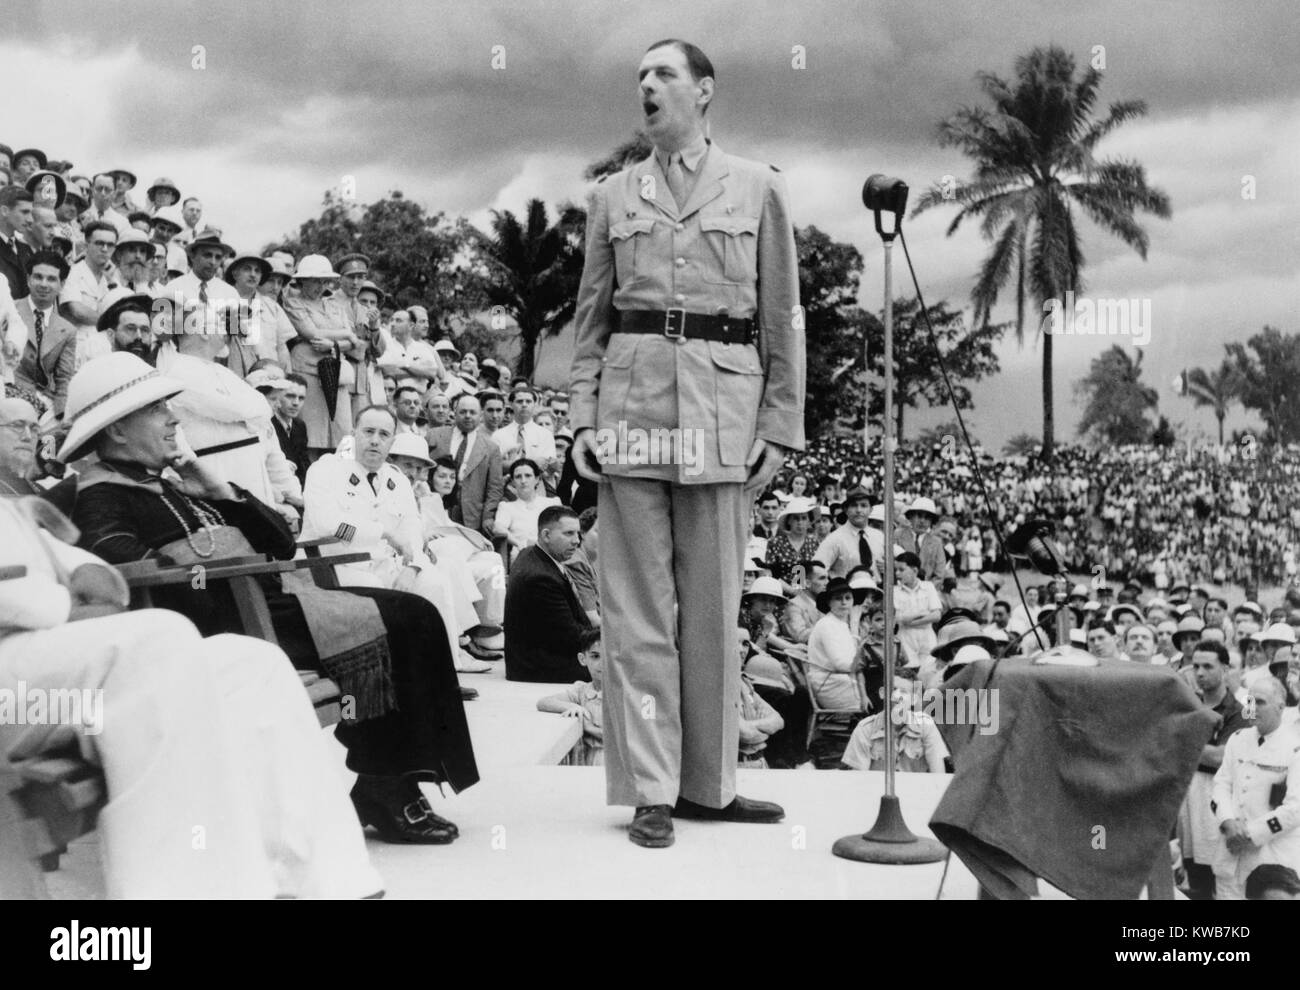 General Charles de Gaulle speaking at the African-French Conference in Brazzaville, Congo, 1944. Brazzaville Conference began major reforms in French colonial policy. World War 2. (BSLOC 2014 8 144) Stock Photo